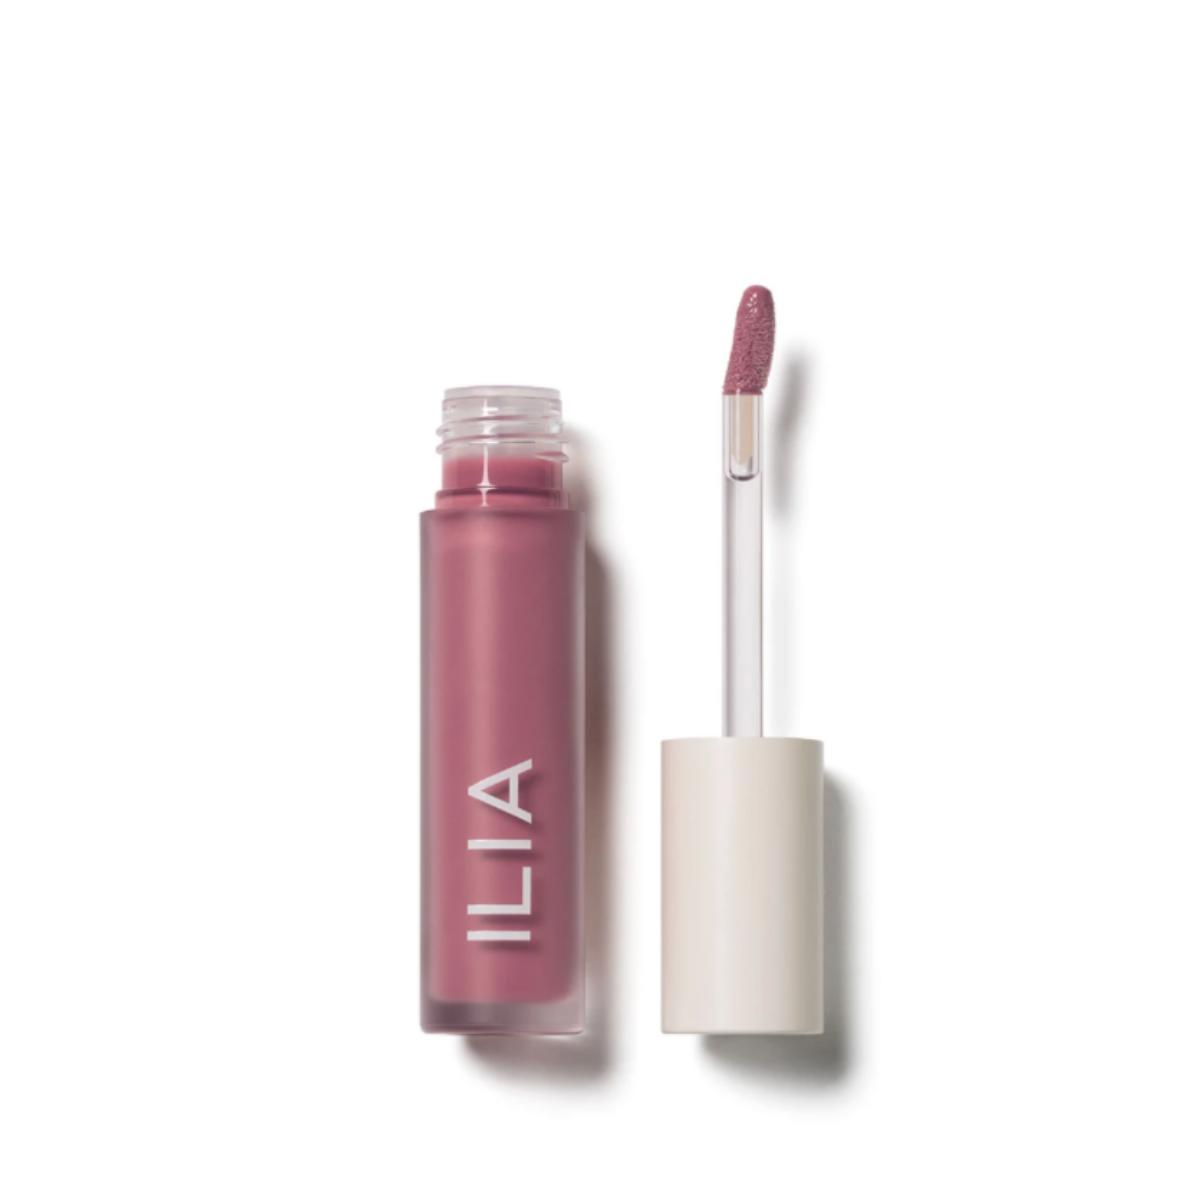 Primary image of Lip Oil Maybe Violet